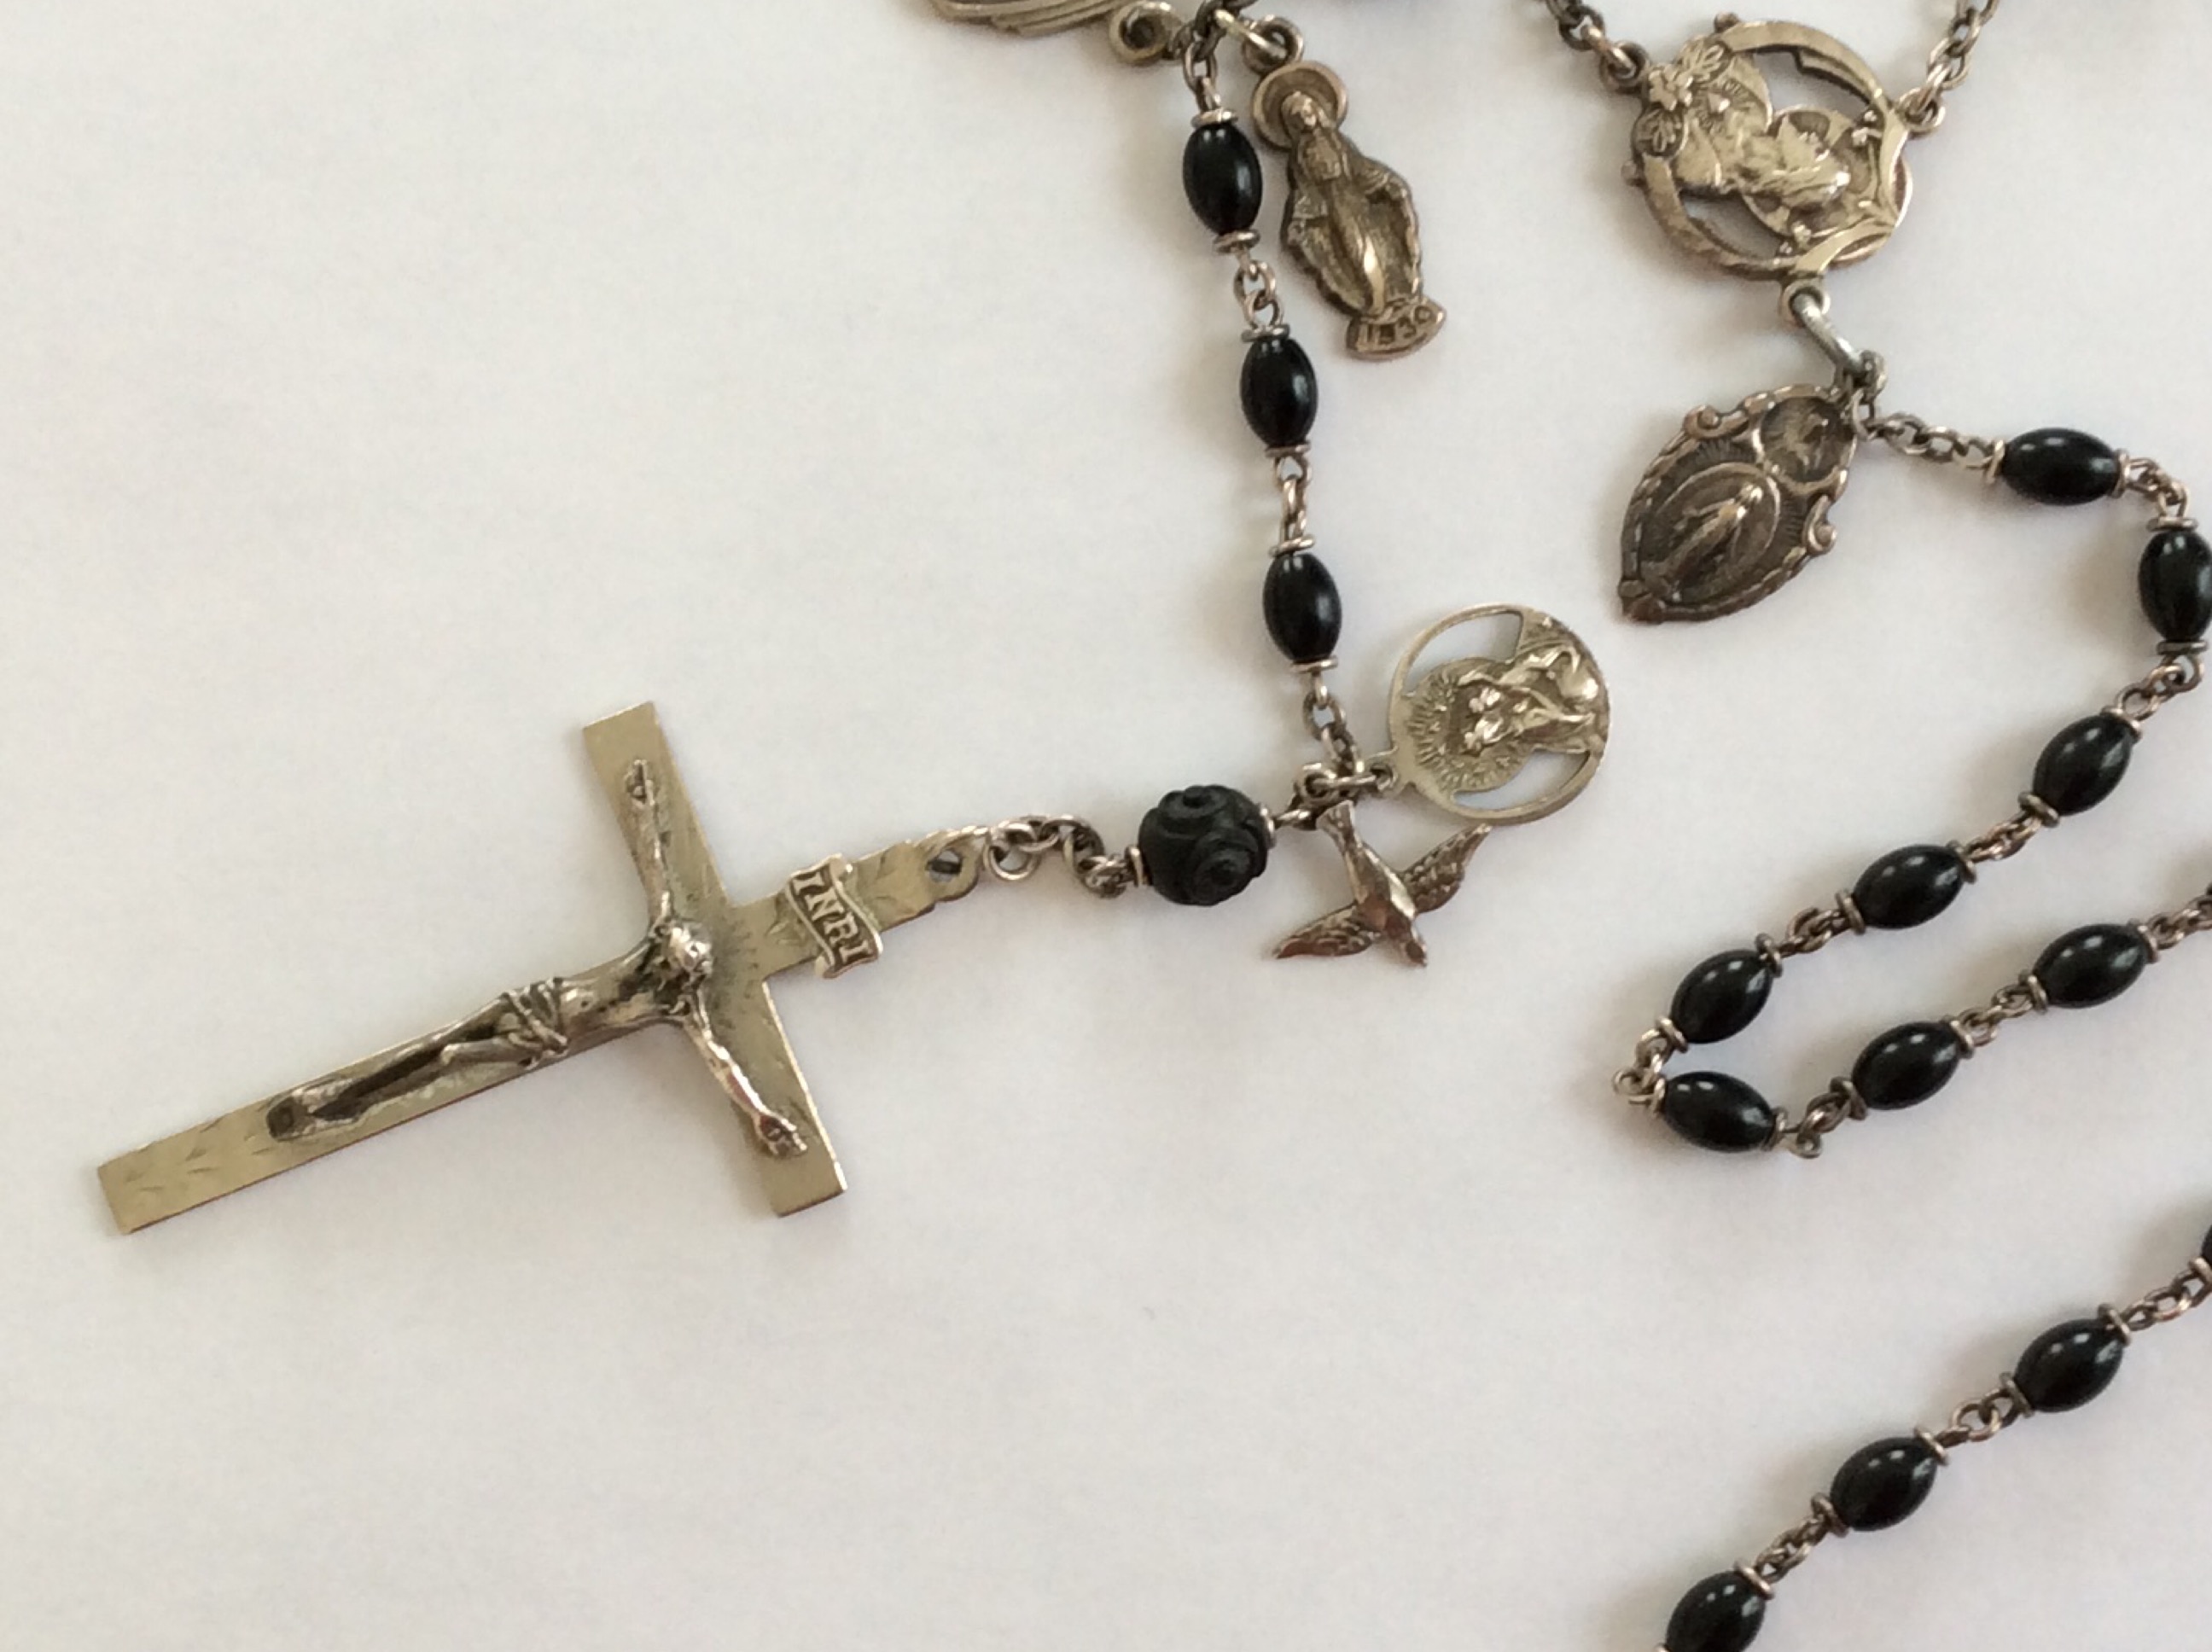 5-decade rosary with medals | Antiques Board